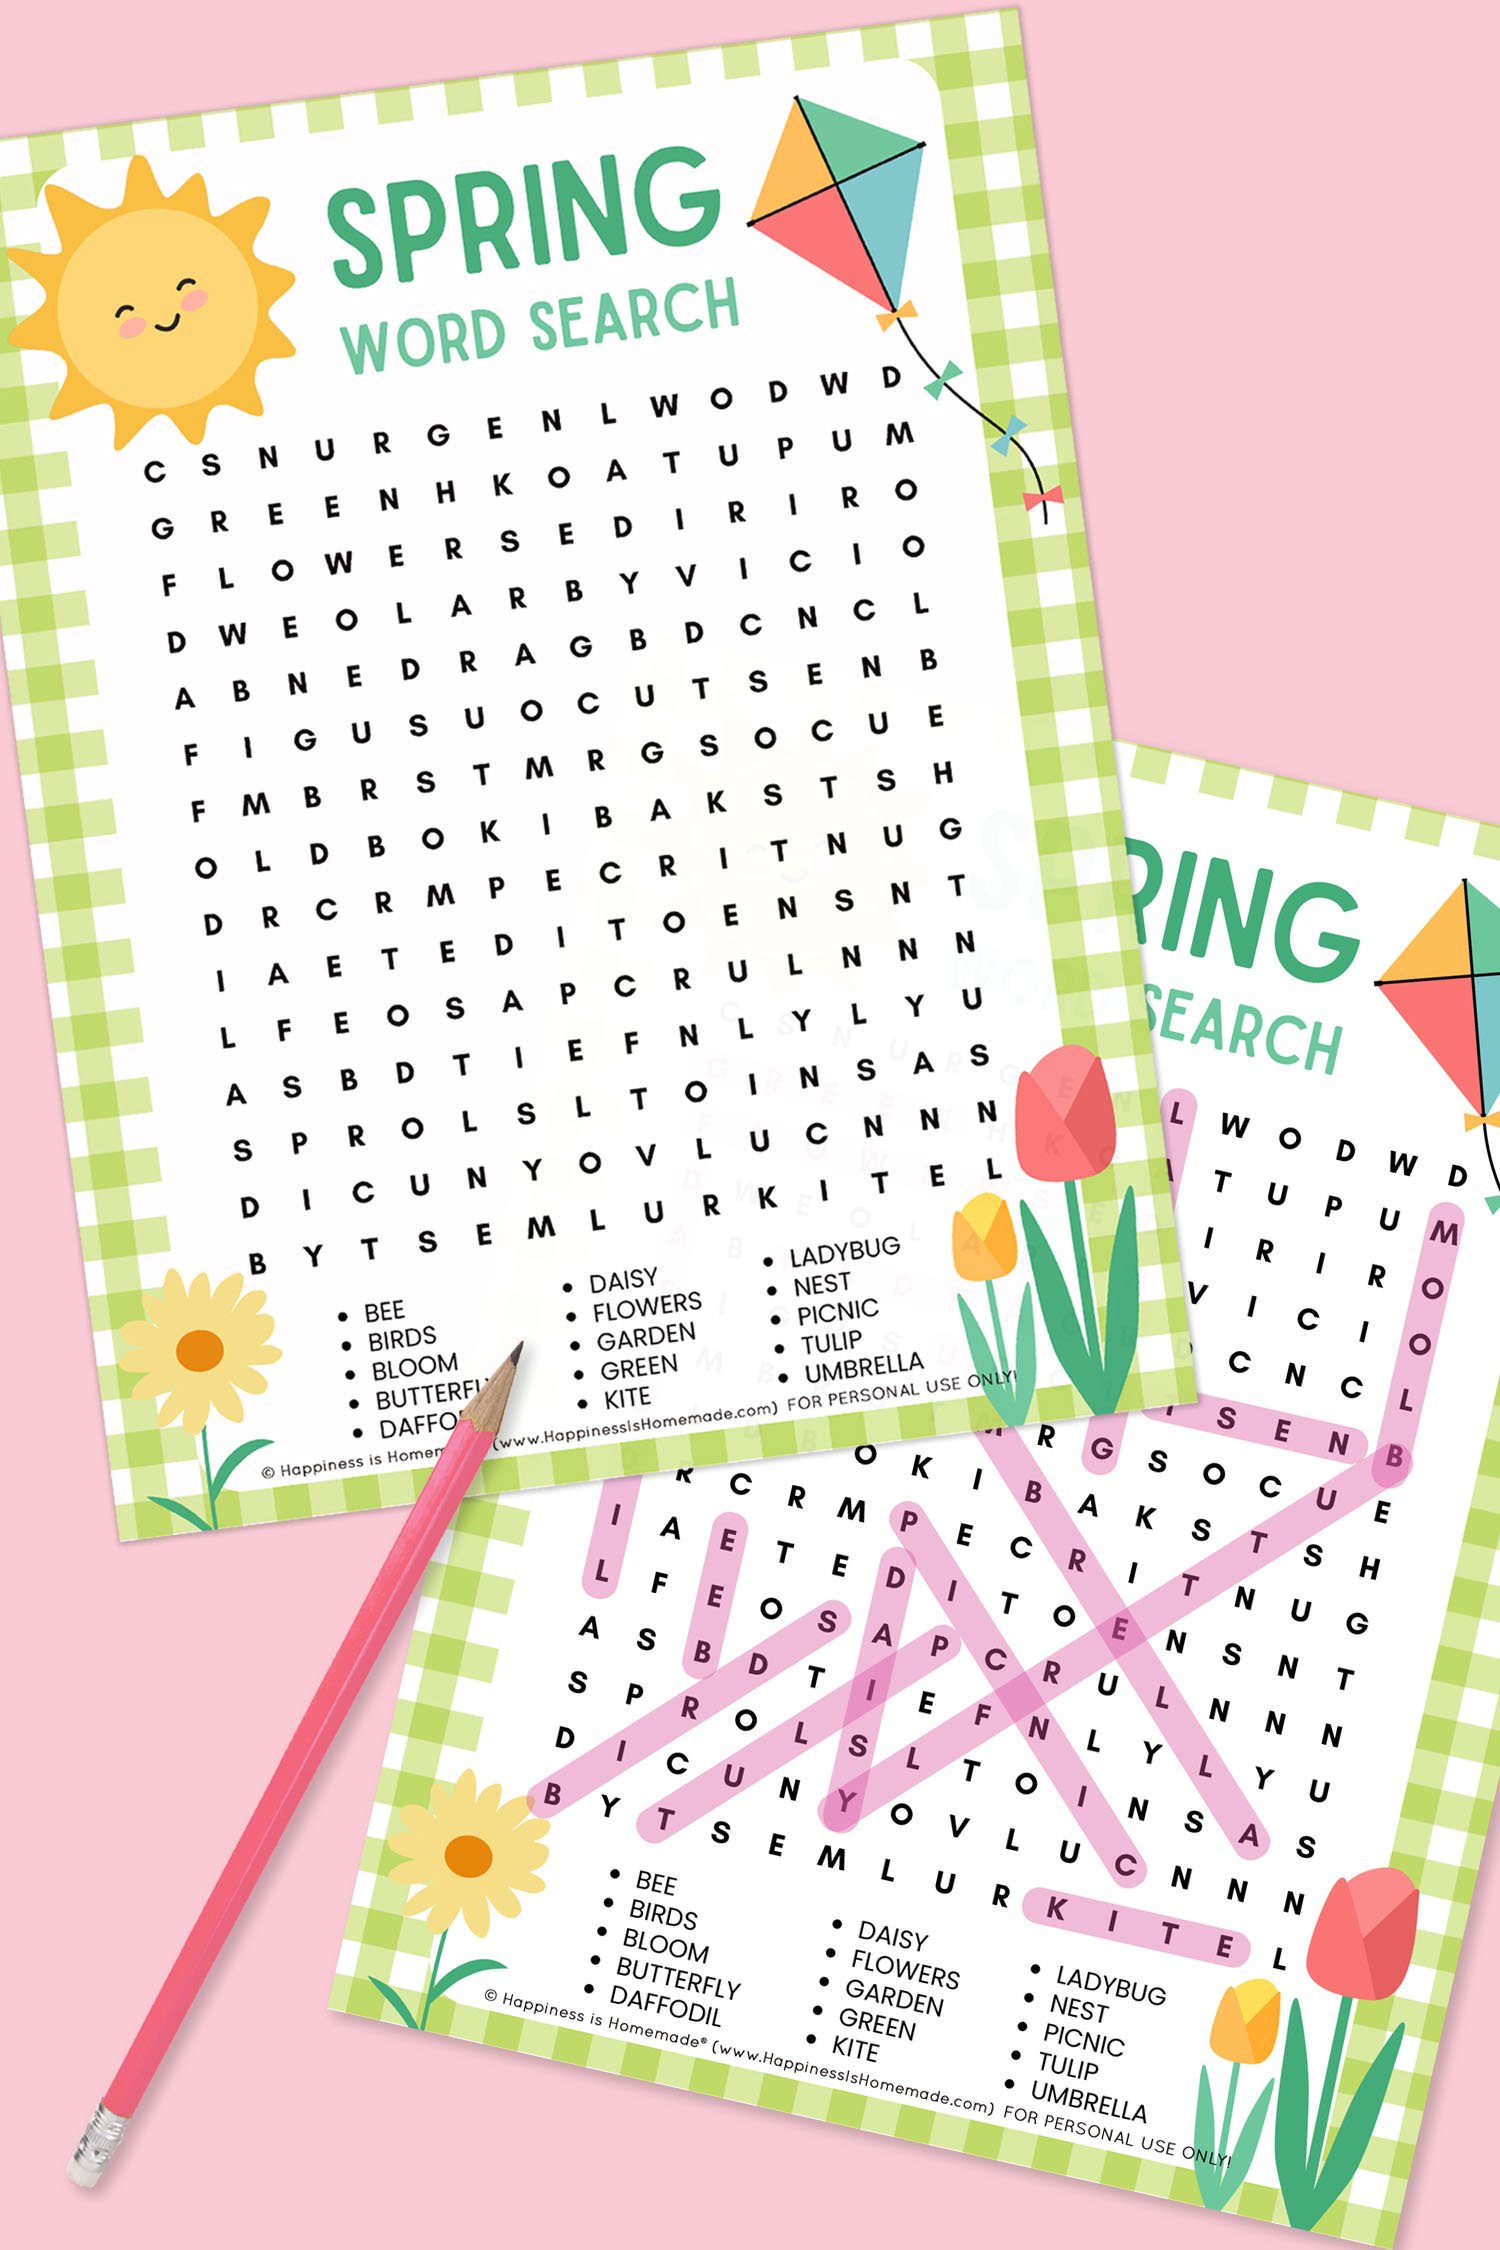 Spring Word Search Printable and answer key on light pink background with dark pink pencil